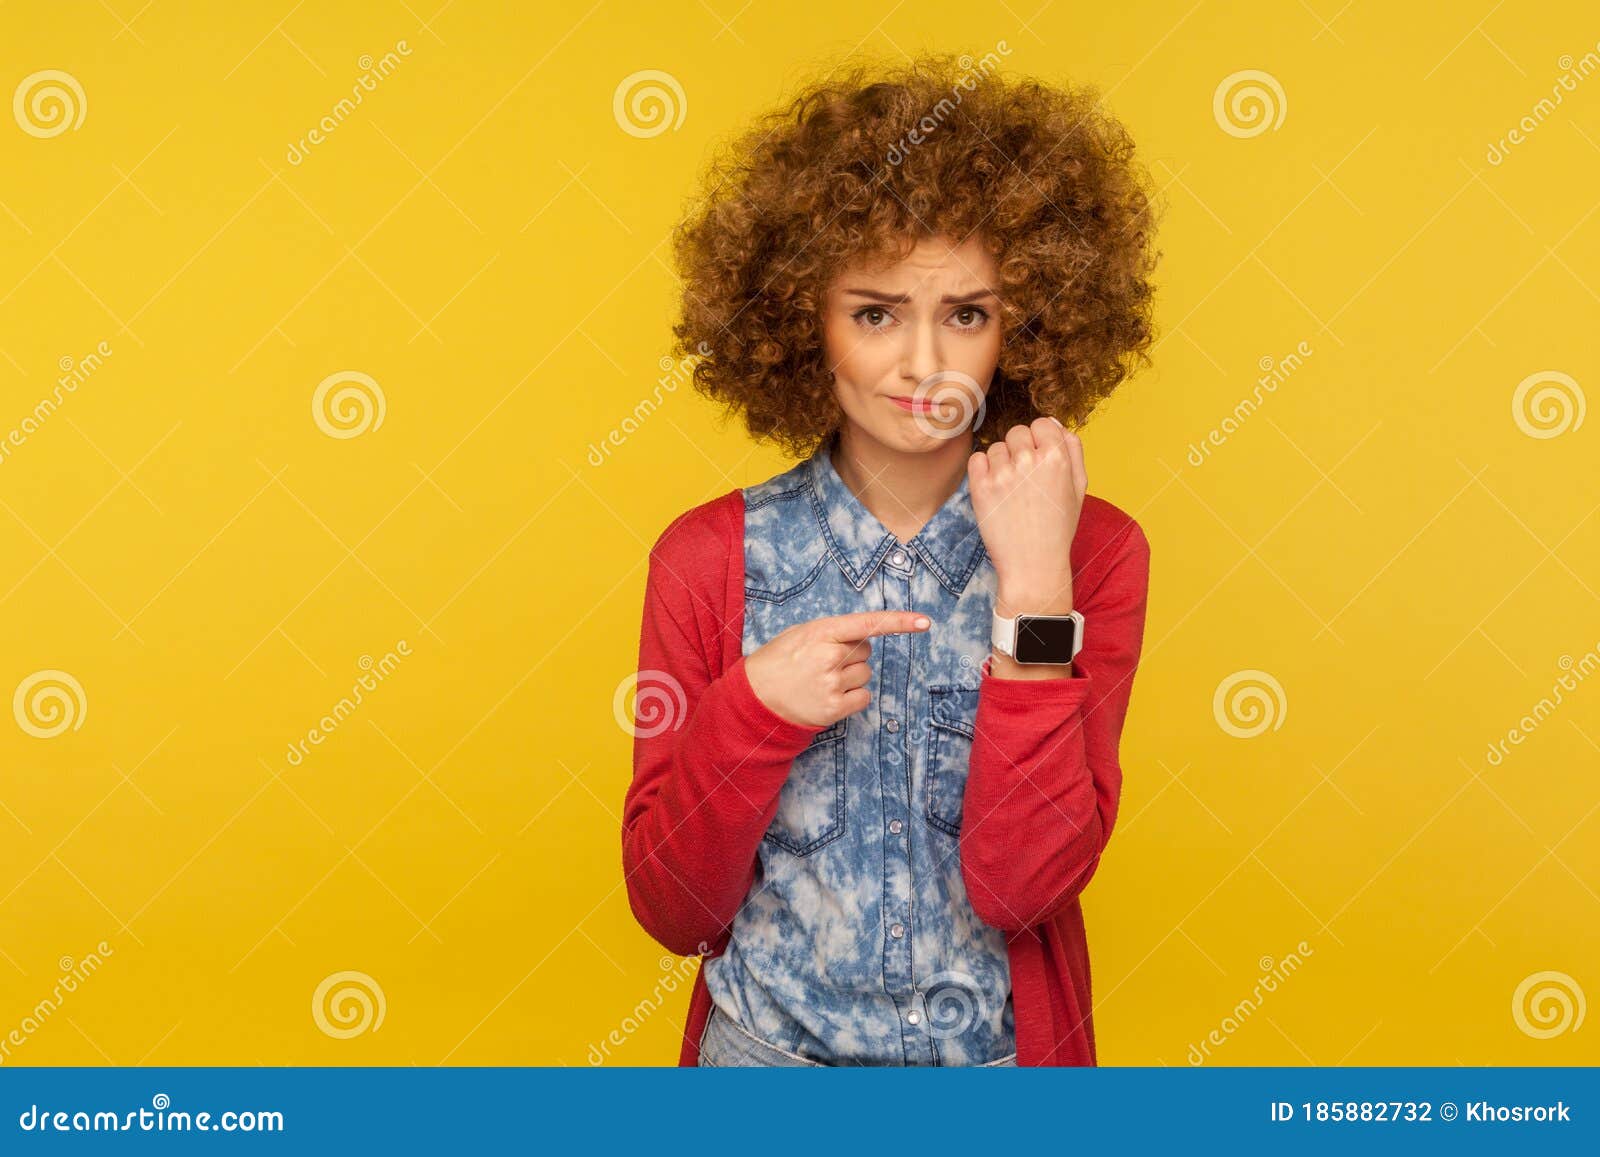 Portrait of Upset Impatient Woman with Curly Hair Showing Wrist Watch ...